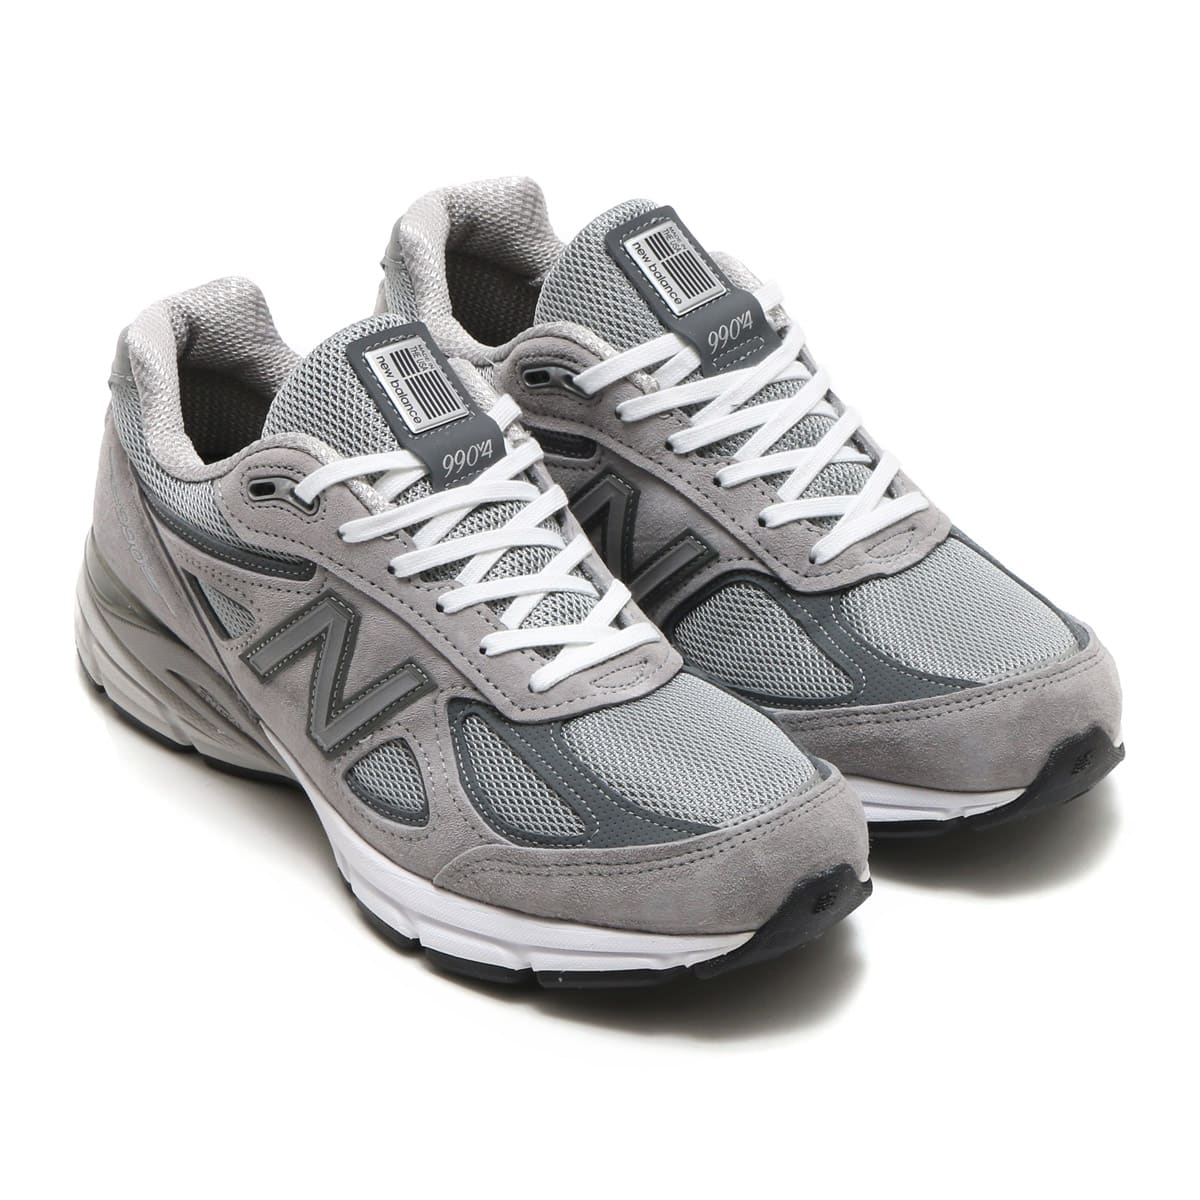 Men's 990v4 RUNNING | New Balance M990GL4 GRAY DUNK SHOES- Made in USA